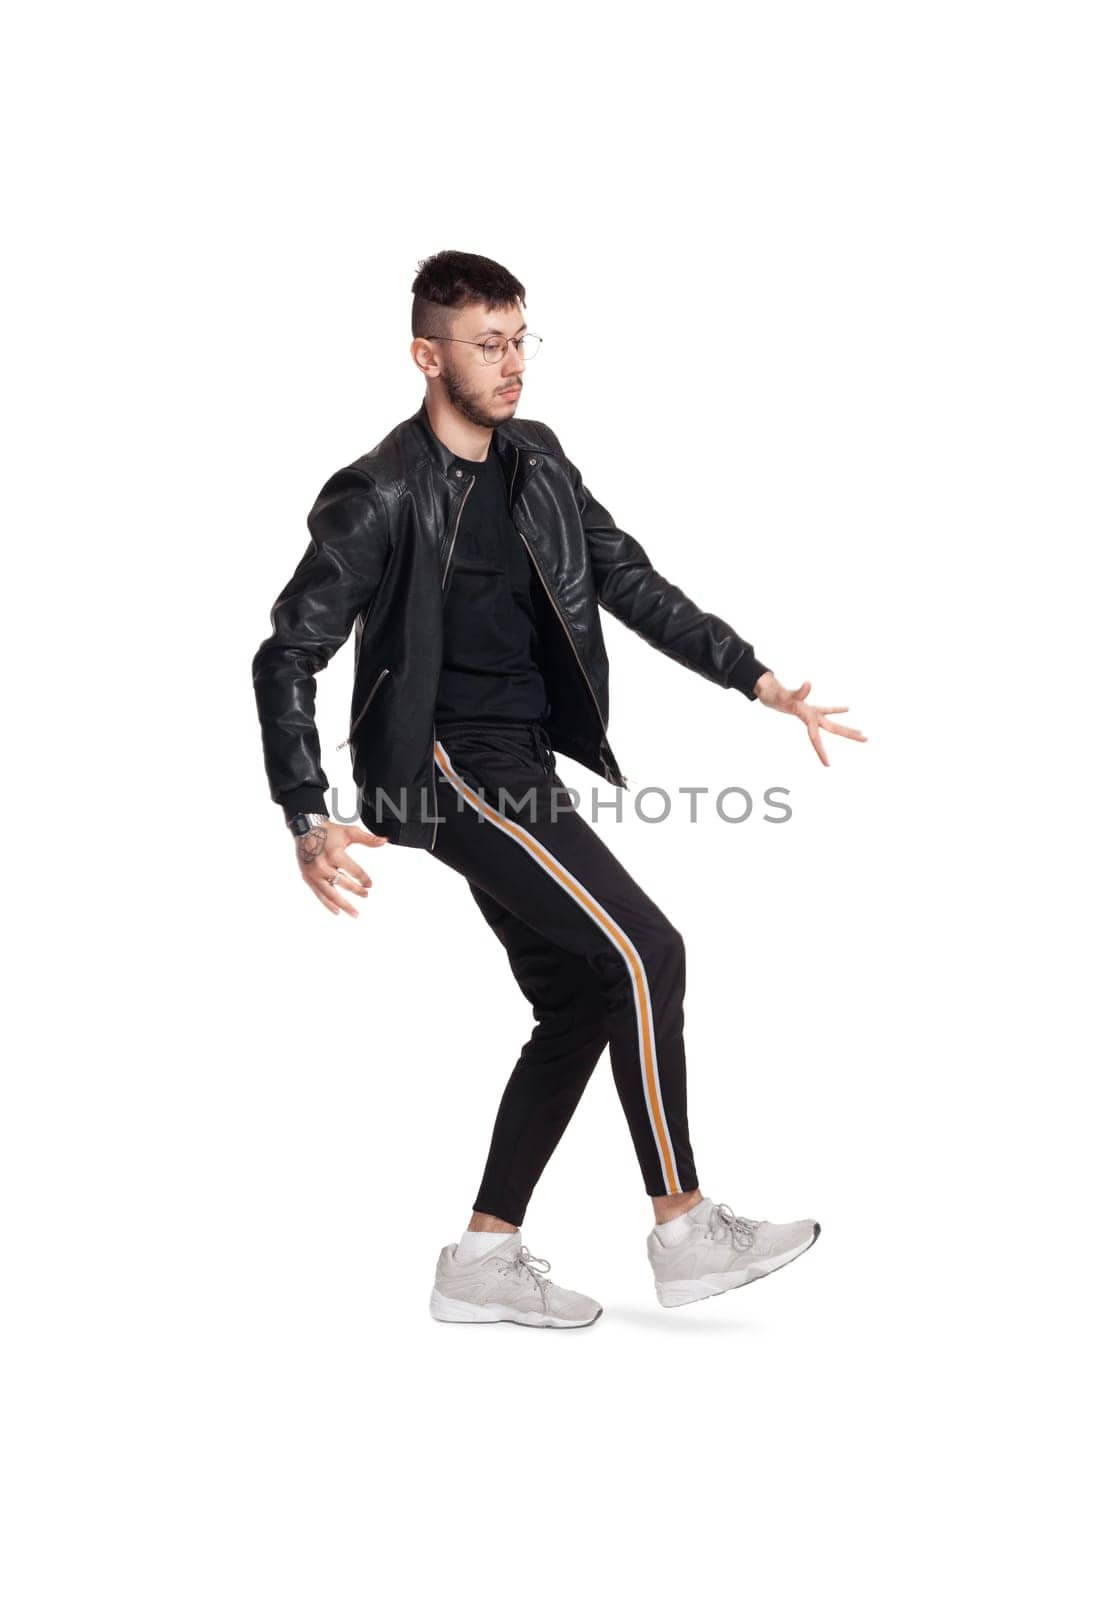 Full-length photo of a modern performer in glasses, black leather jacket, t-shirt, sports pants and light sneakers fooling around in studio. Indoor photo of a graceful man dancing sideways isolated on white background. Music and imagination.